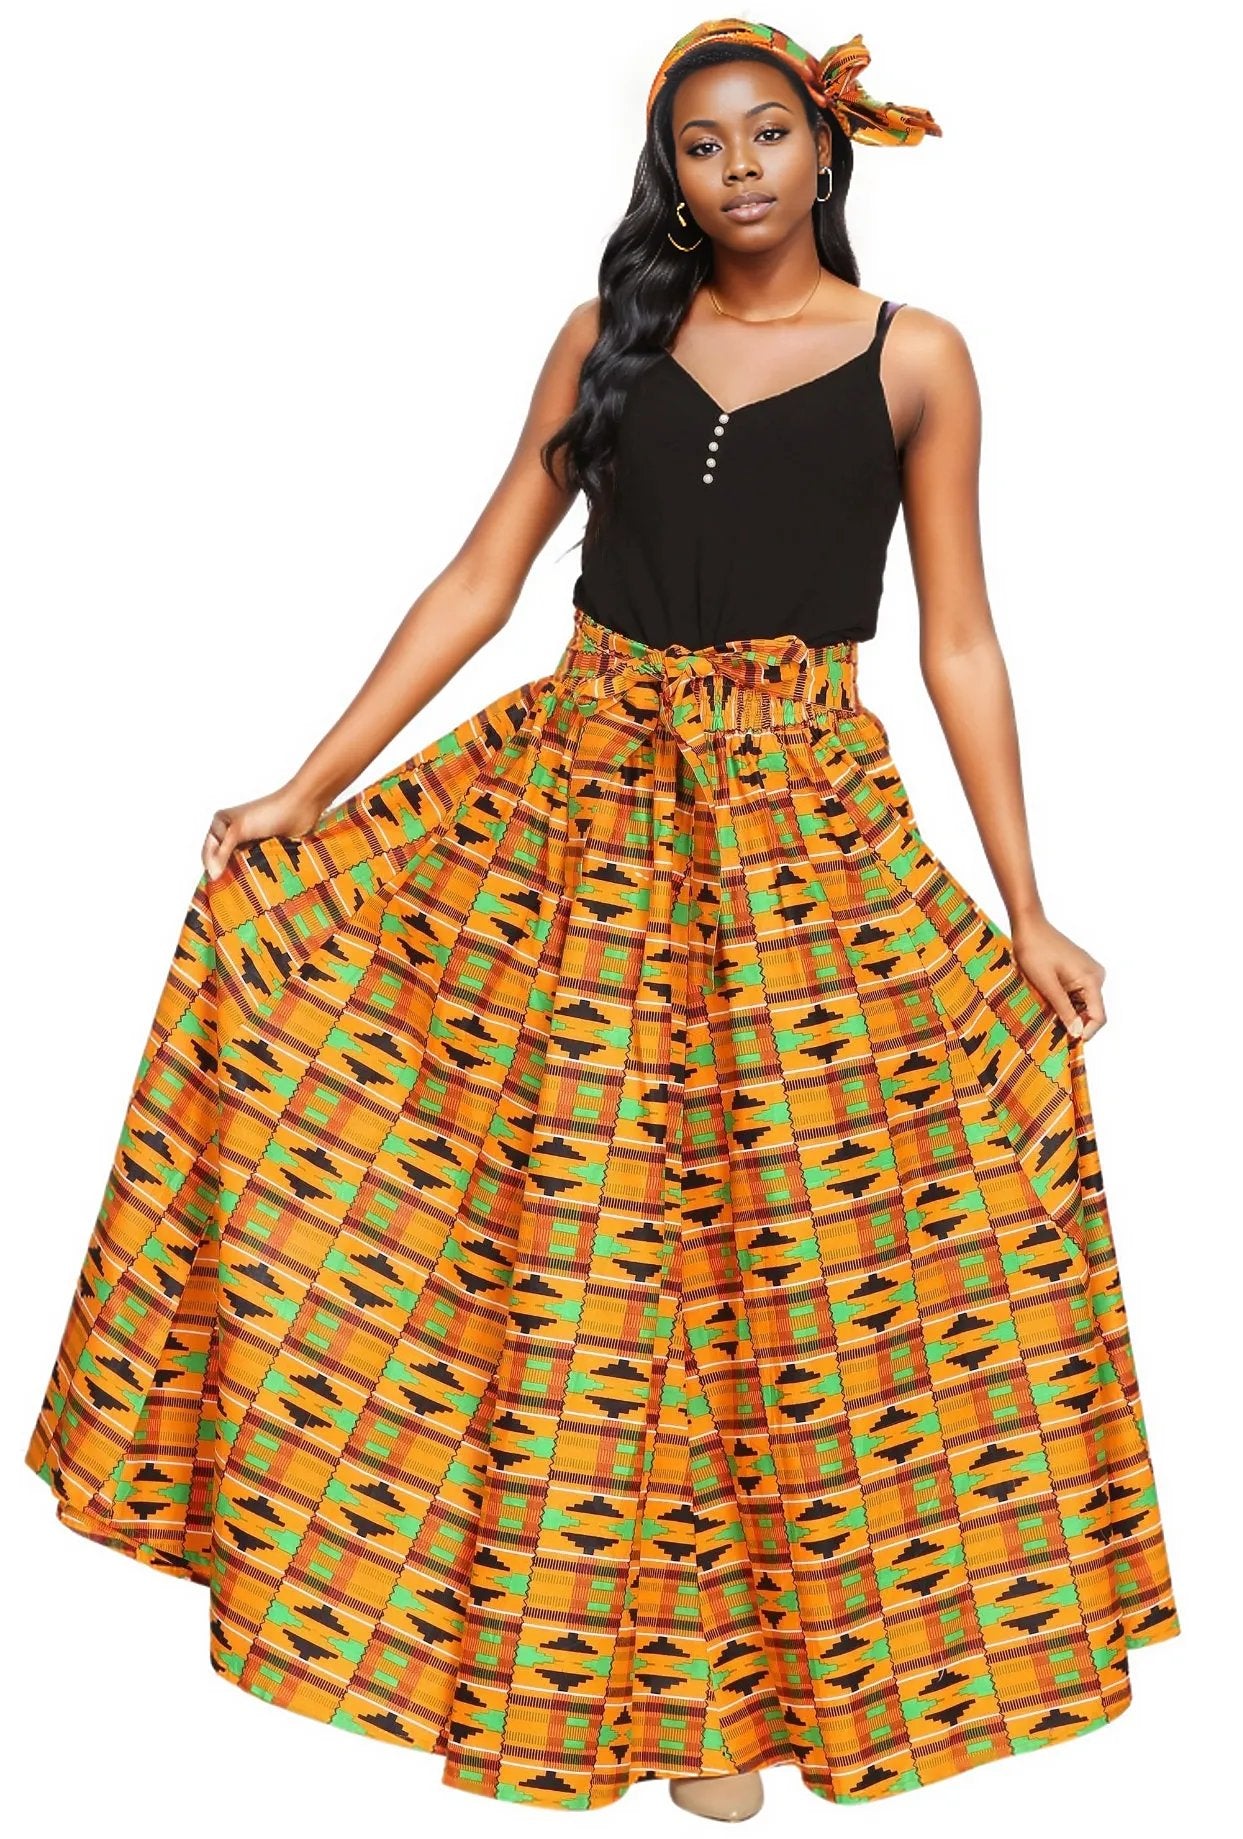 Hand Made African Print Full Skirt with Coordinating Head Wrap and Facemask (Orange, Green, Black)